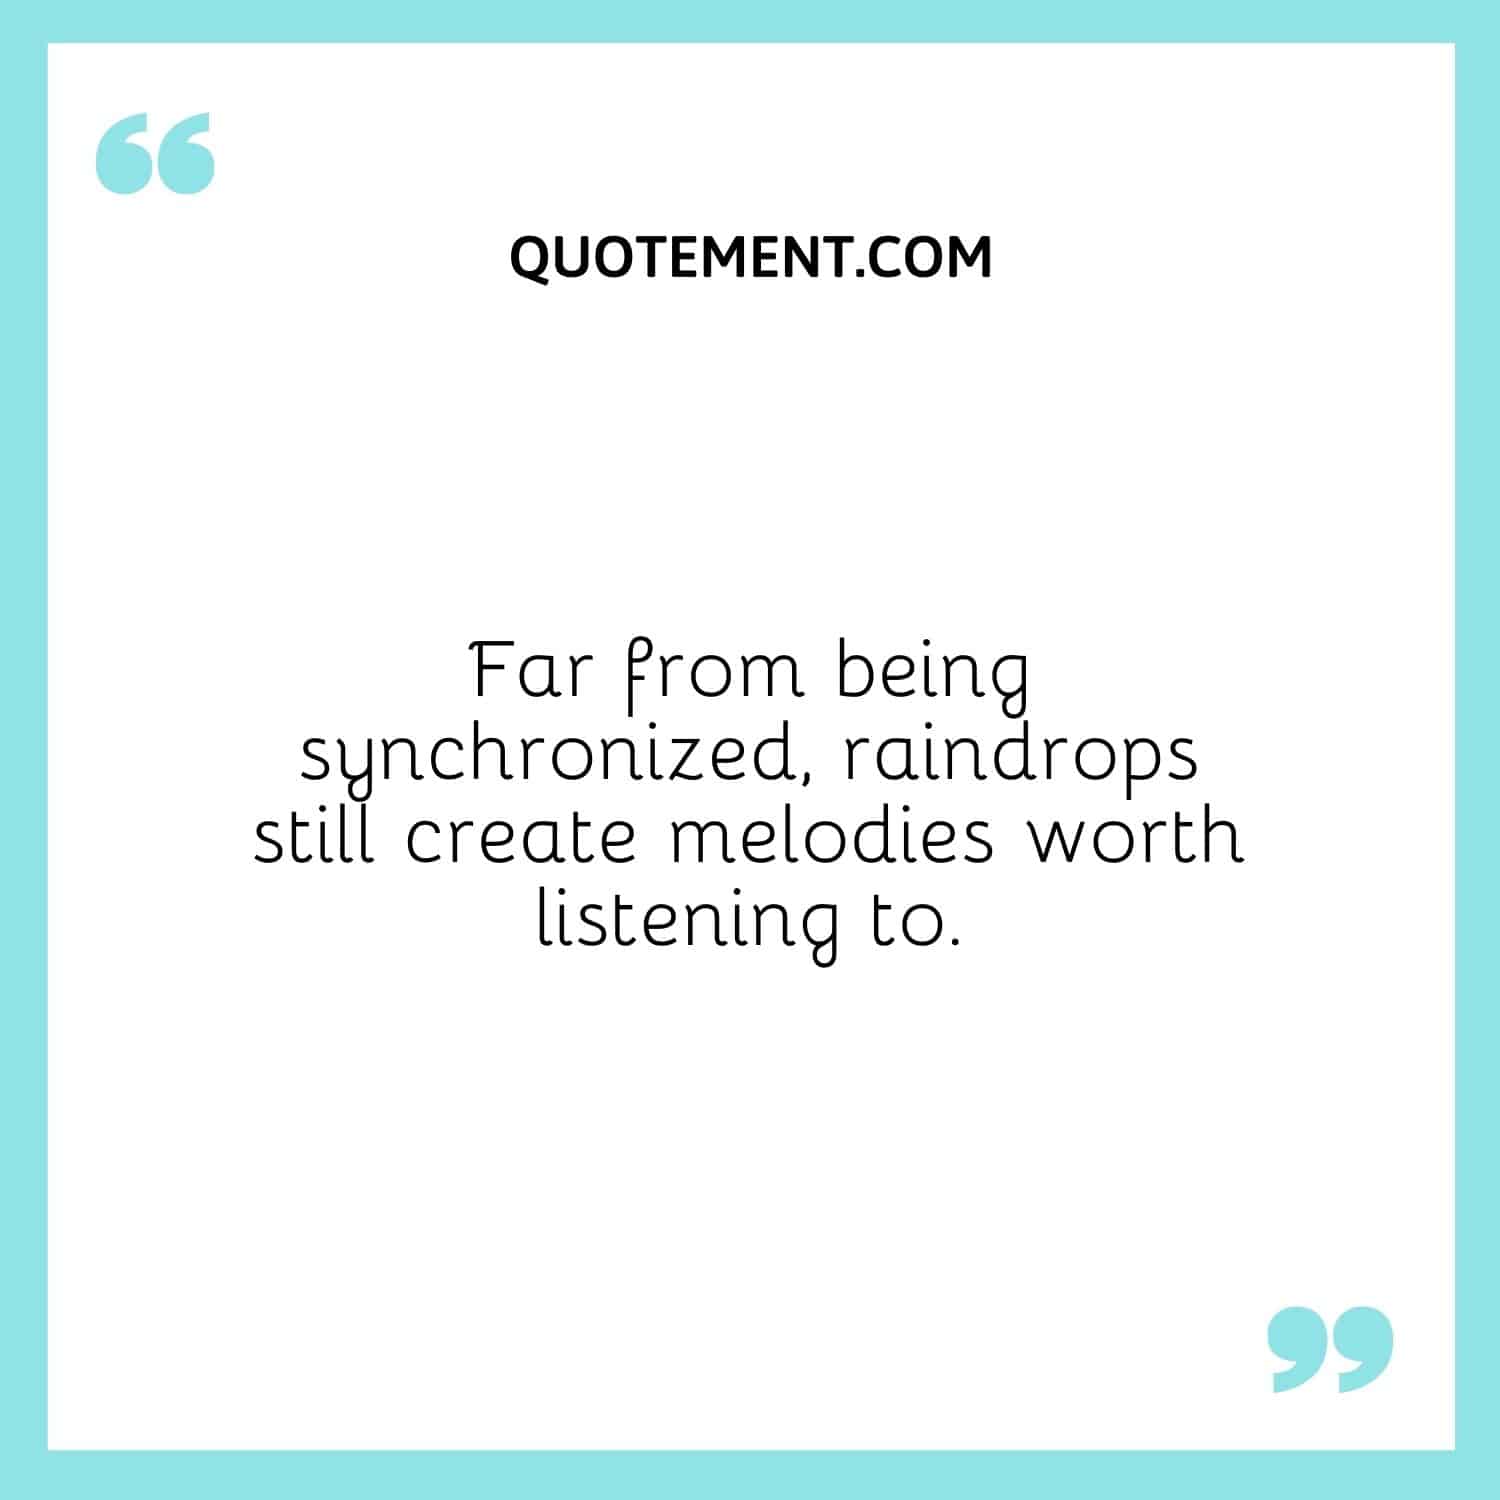 Far from being synchronized, raindrops still create melodies worth listening to